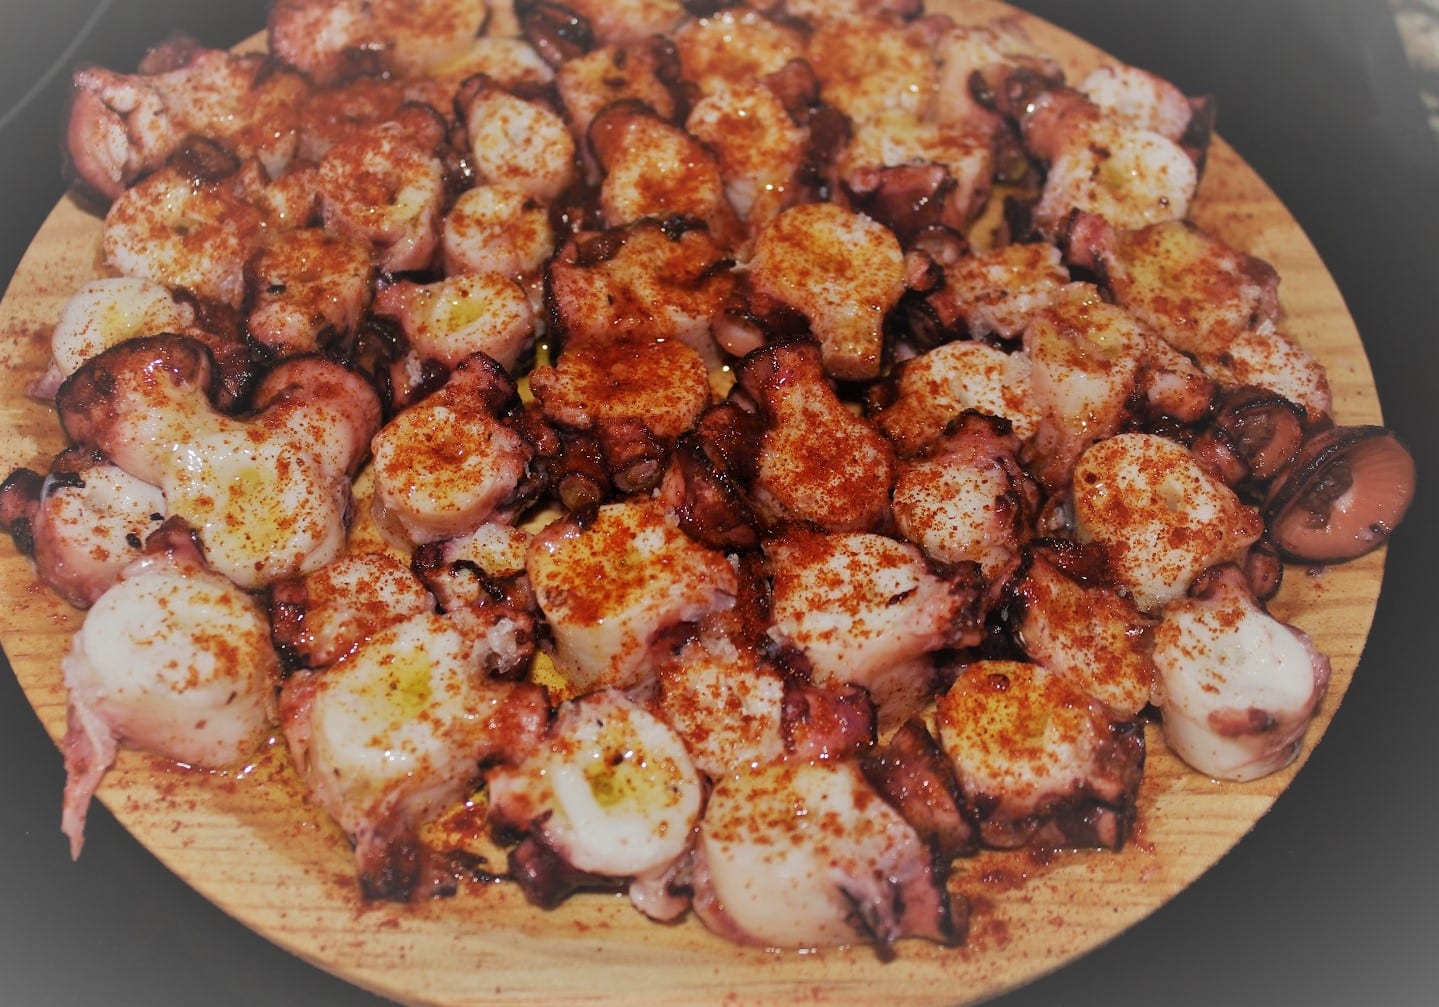 Pulpo a la gallega - The Best Things to Eat in Europe